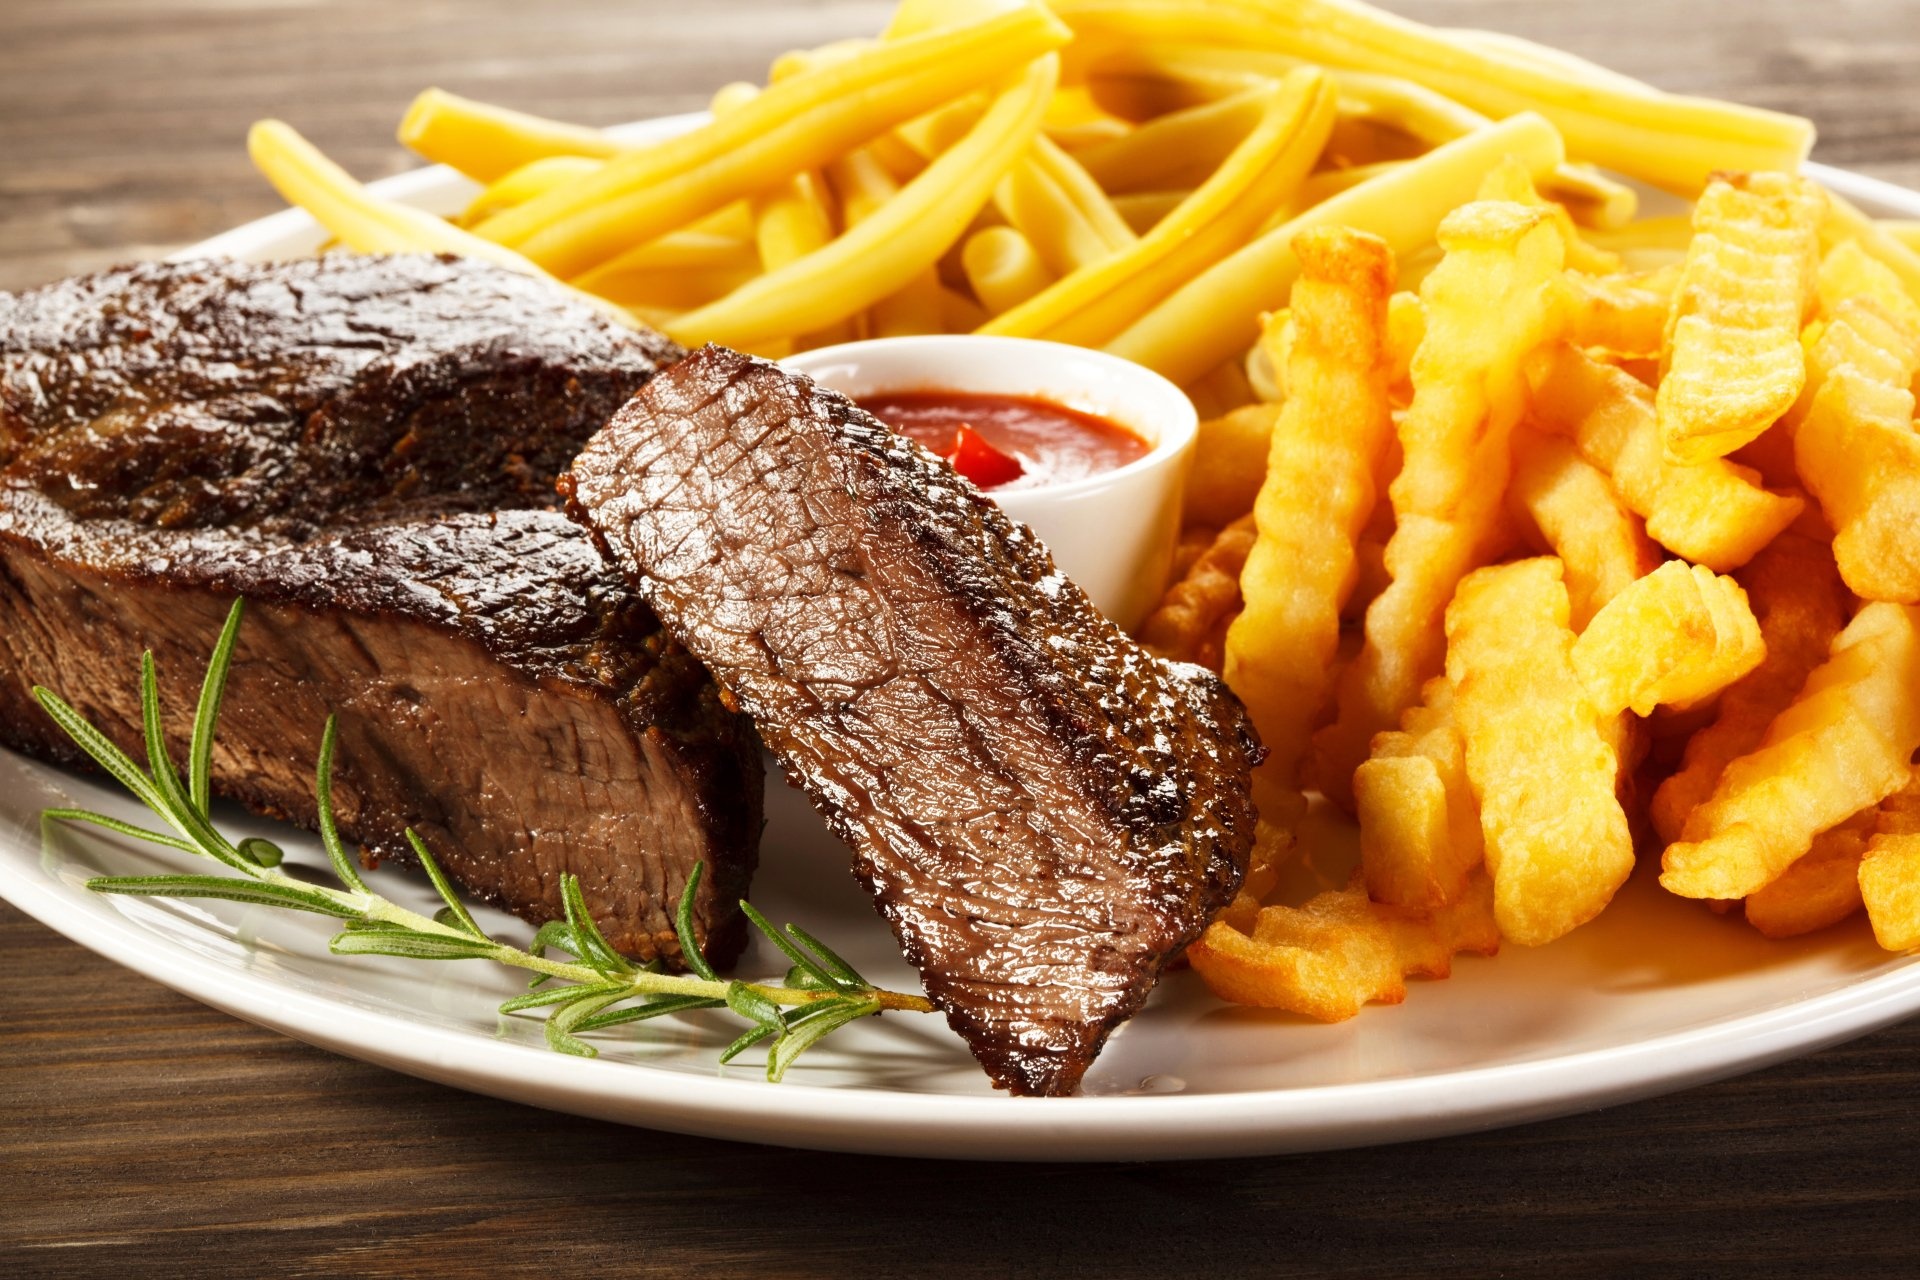 French Fries: Steak, A staple in fast food chains, Cuisine, Dish. 1920x1280 HD Wallpaper.